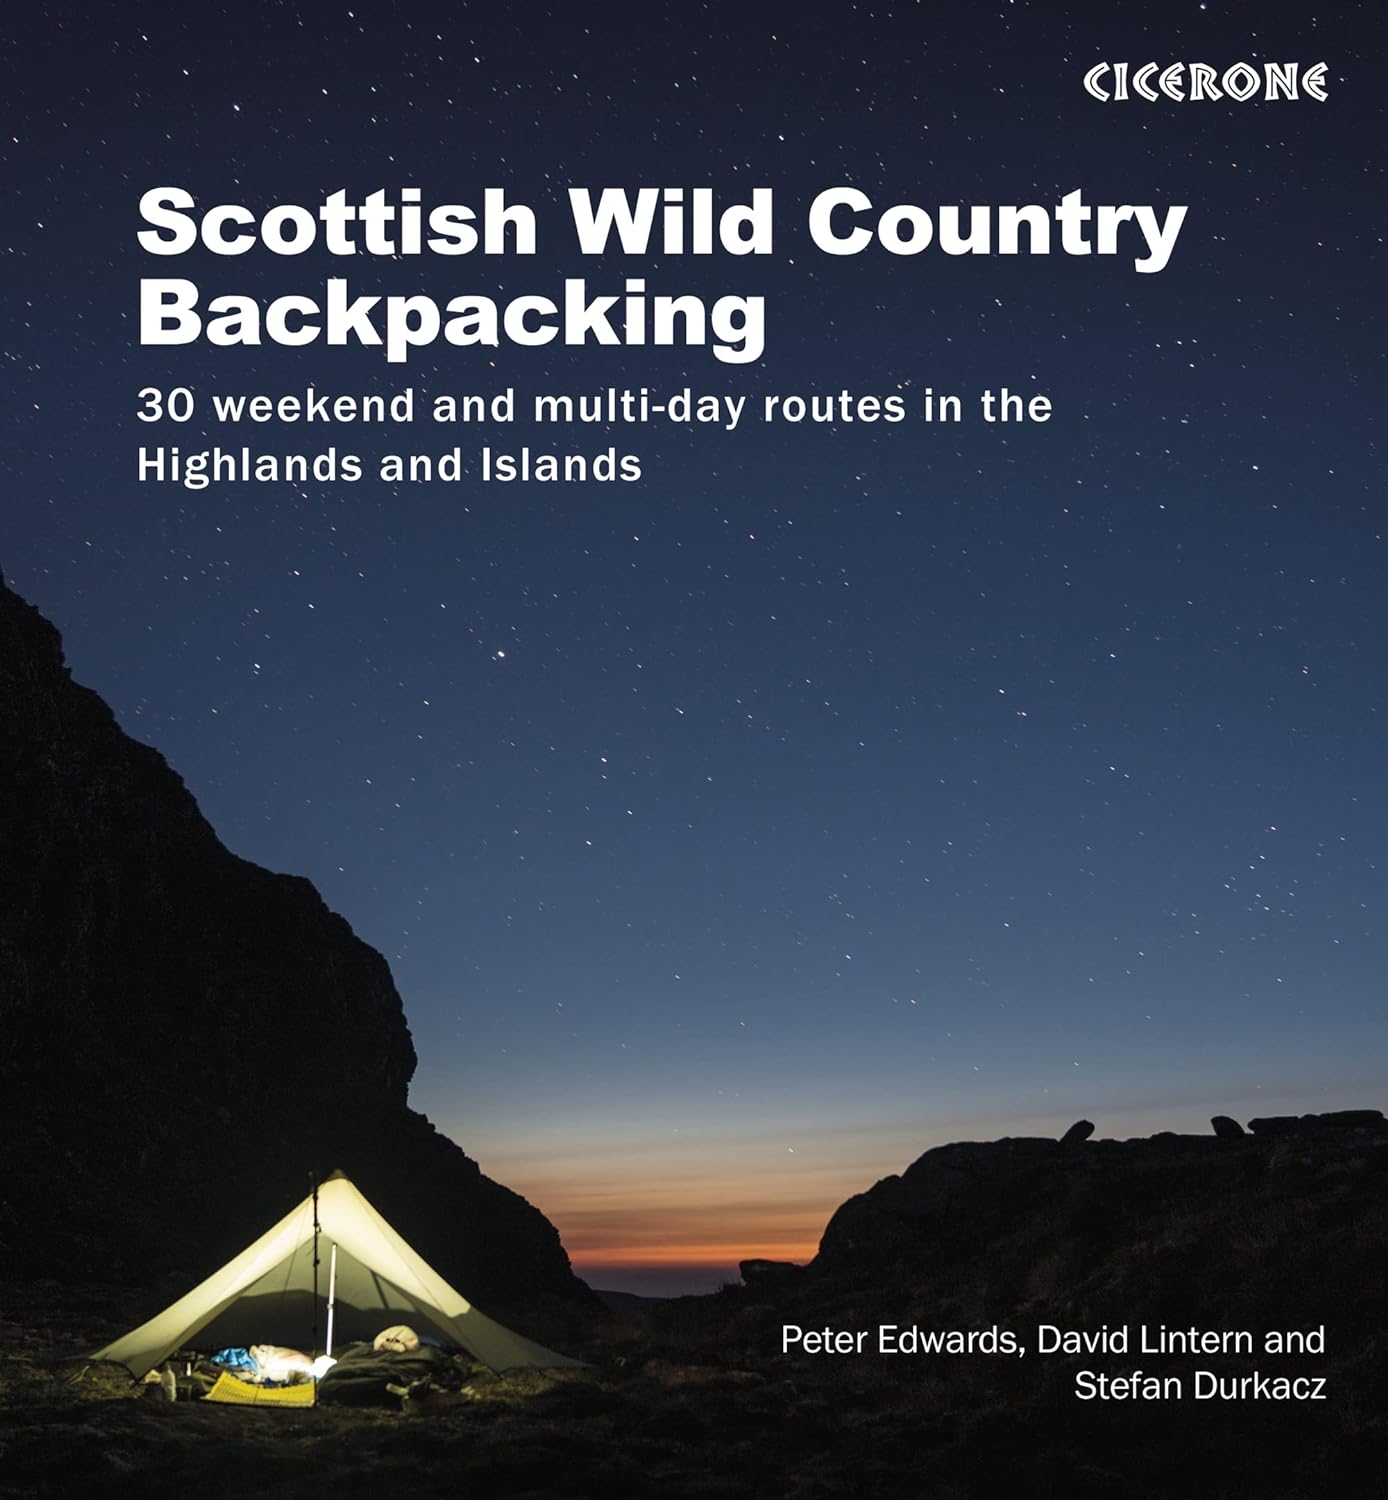 Scottish Wild Country Backpacking: 30 weekend and multi-day routes in the Highlands and Islands     Paperback – 4 Oct. 2022